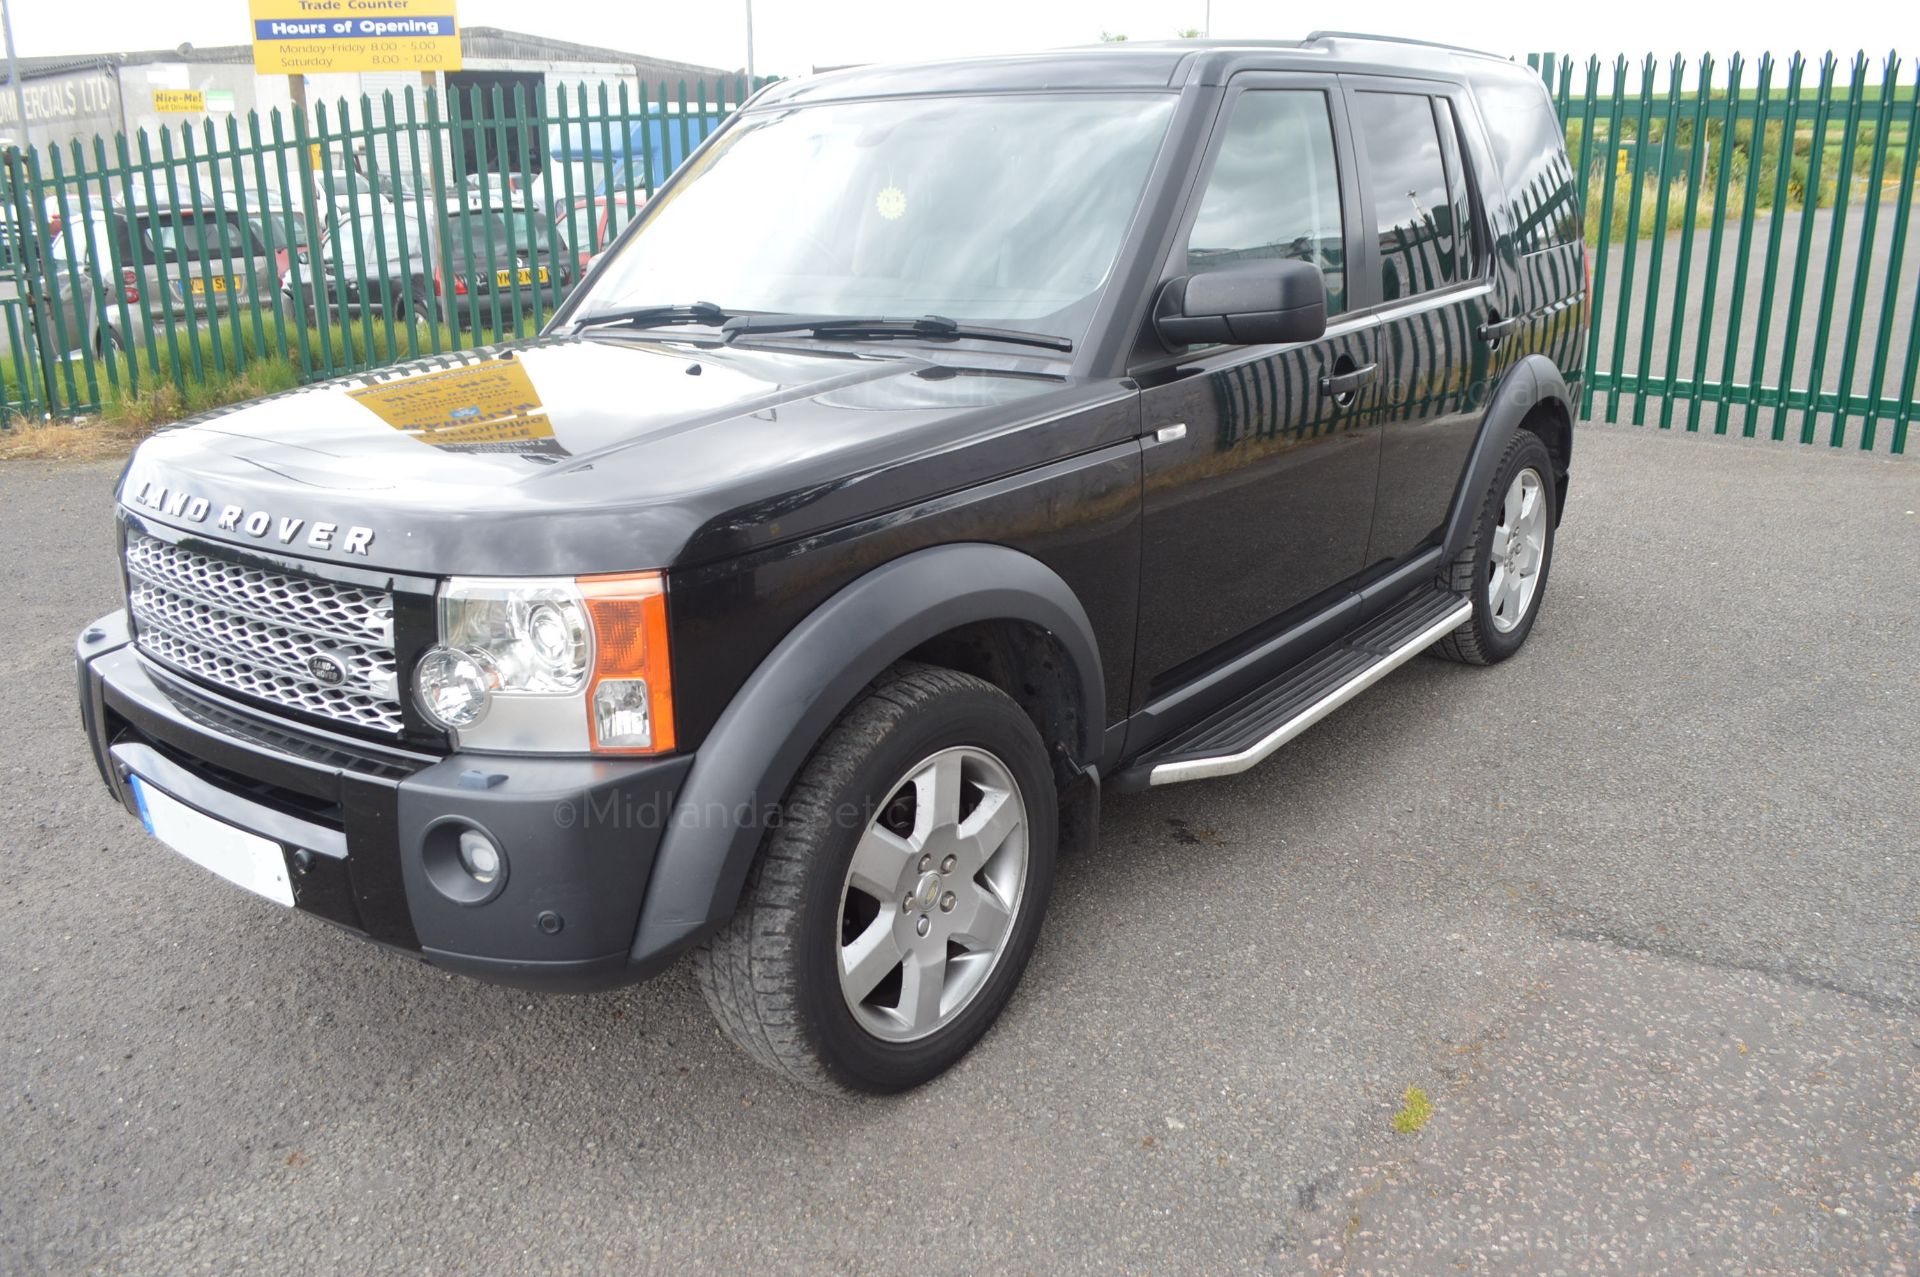 2006/56 REG LAND ROVER DISCOVERY 3 TDV6 HSE AUTO 7 SEAT SERVICE HISTORY - Image 3 of 15